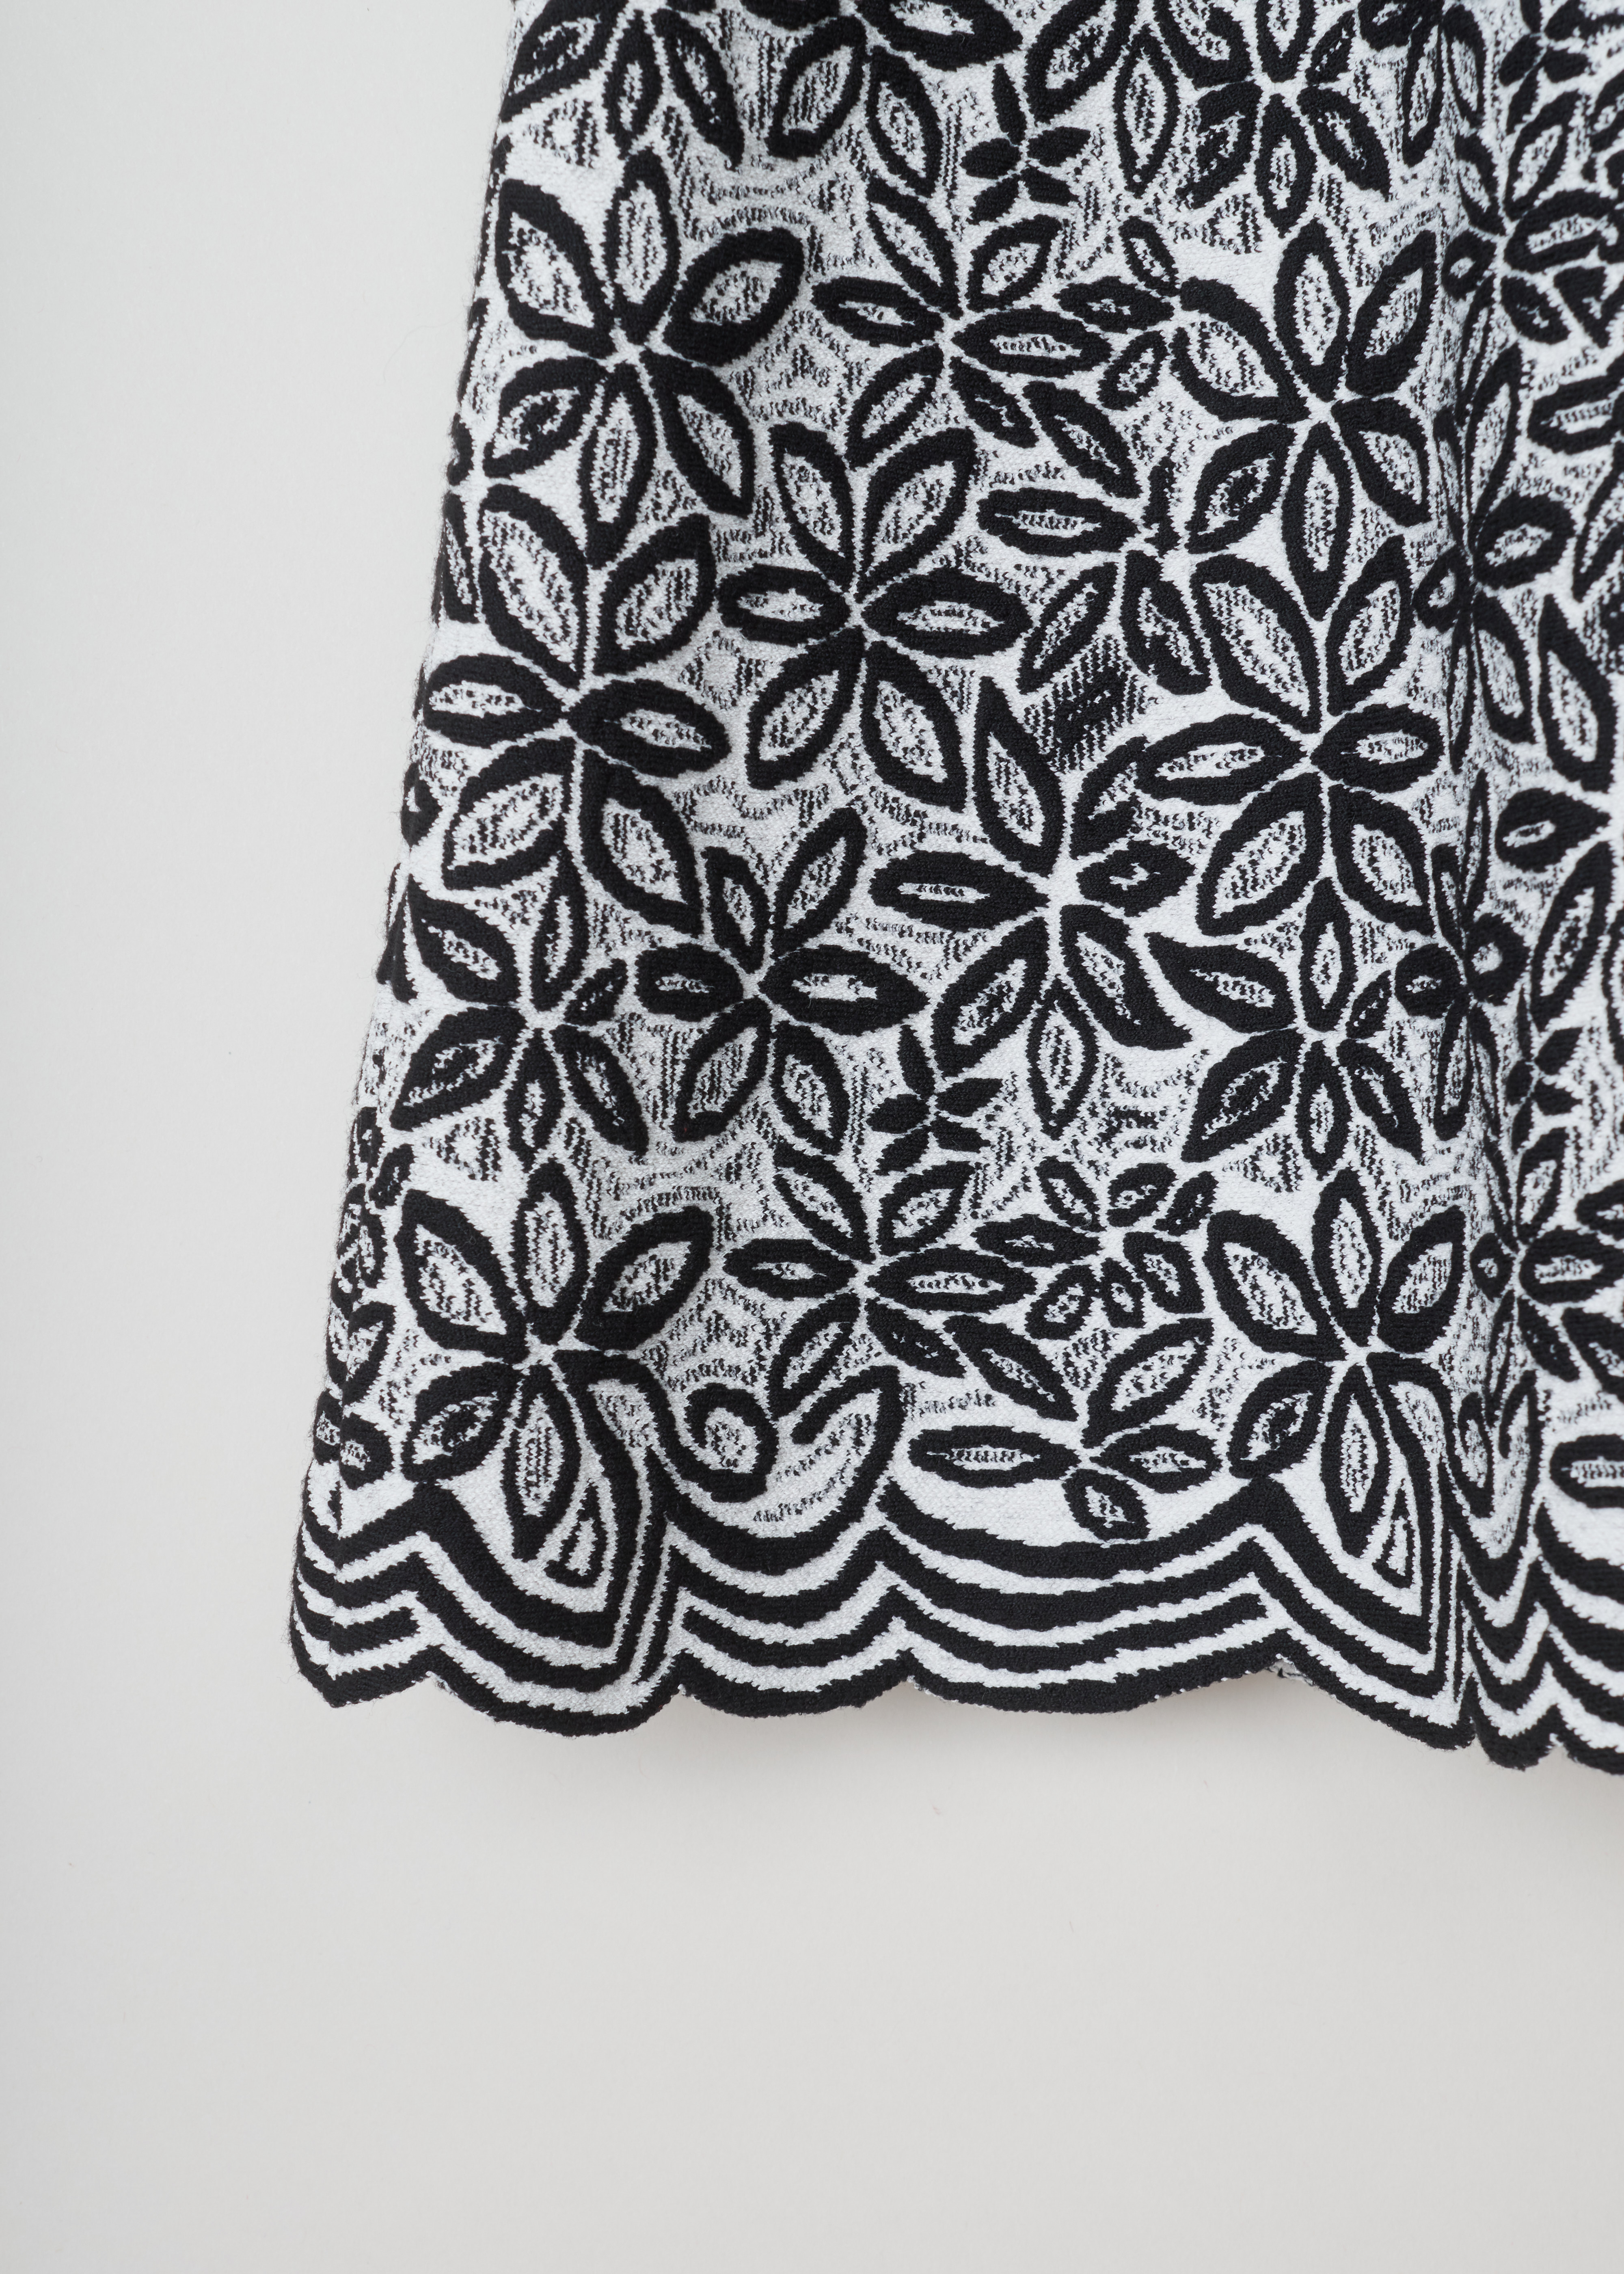 AlaÃ¯a, Wool-blend tunic with a flower pattern, 7W9UE52RM353_TUNIQUE_ADENIUM_C009_Blanc/Noir, Grey, Print, Detail 1, Jacquard knitted tunic with a black and white flower motif. The dress has short sleeves, a wide round neckline, an A-line silhouette and scalloped hems.

